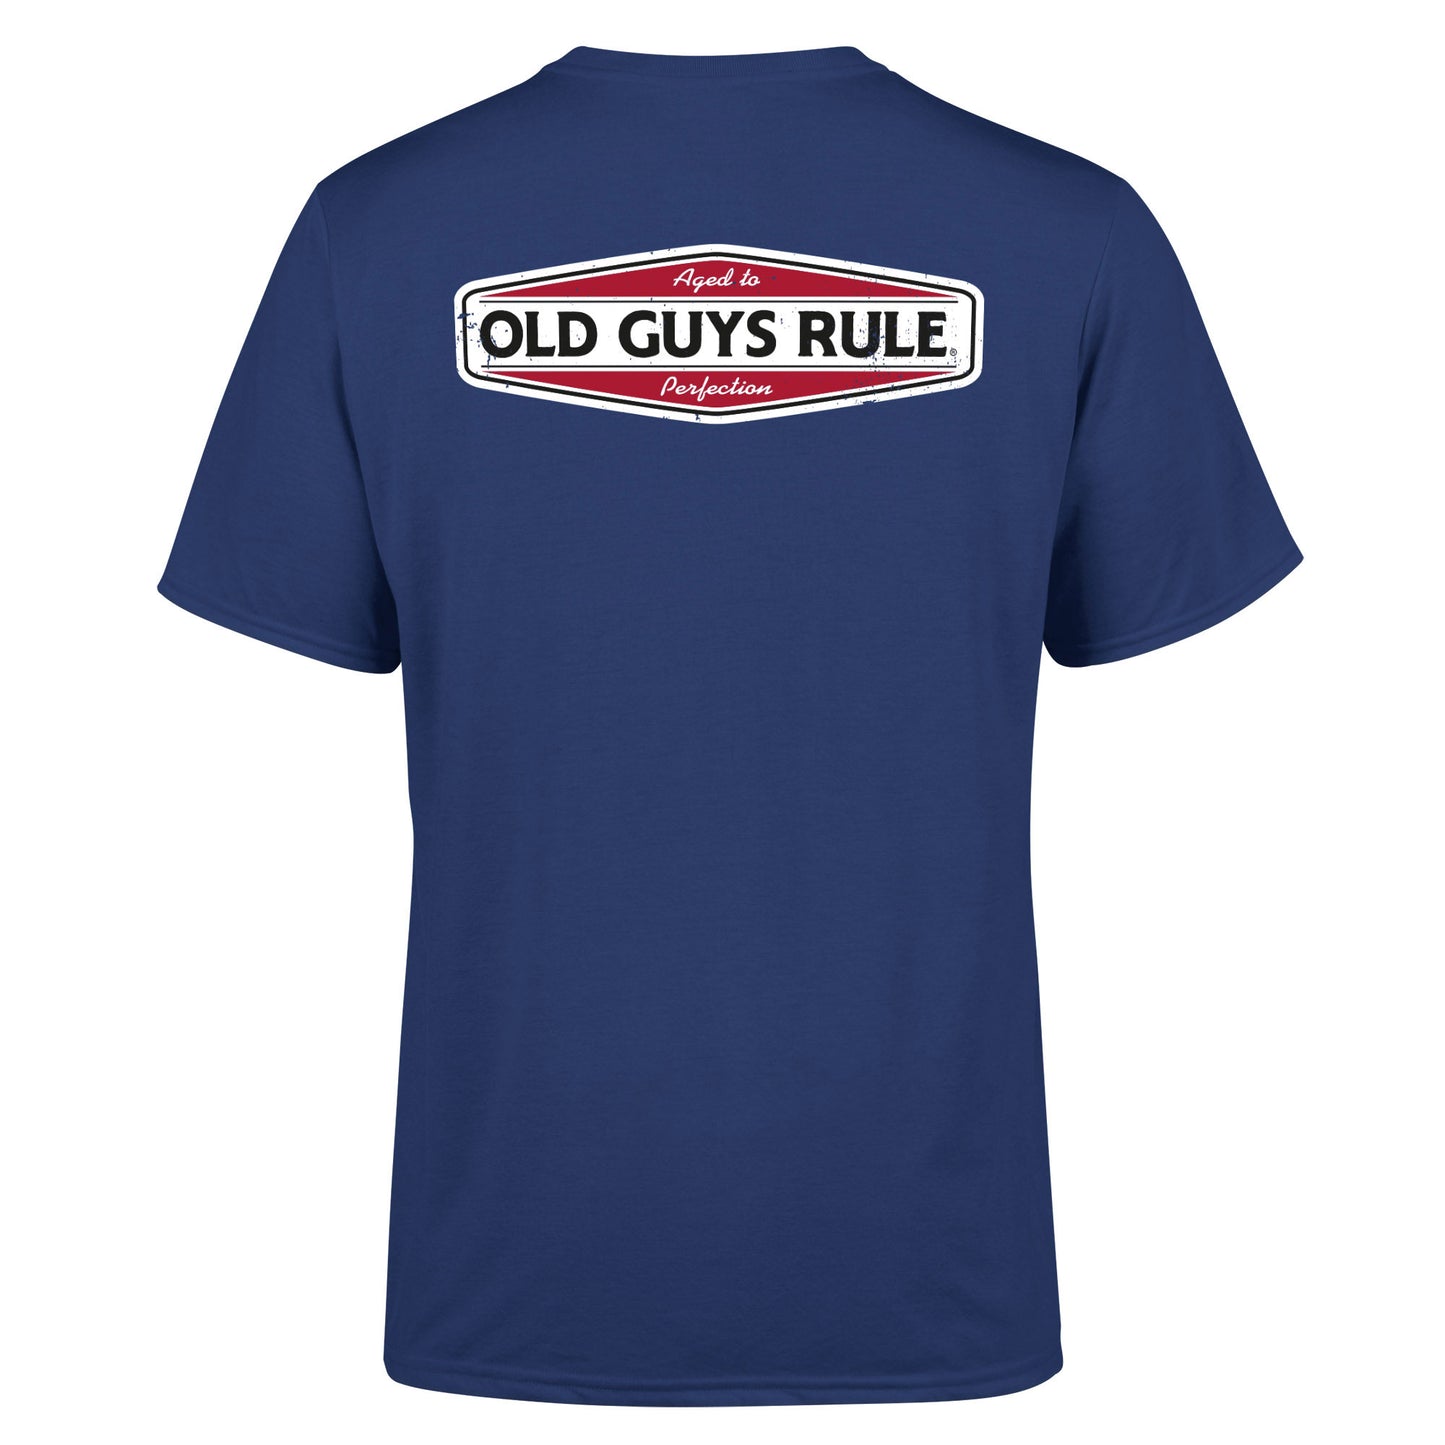 Old Guys Rule T-Shirt - Aged to perfection 1